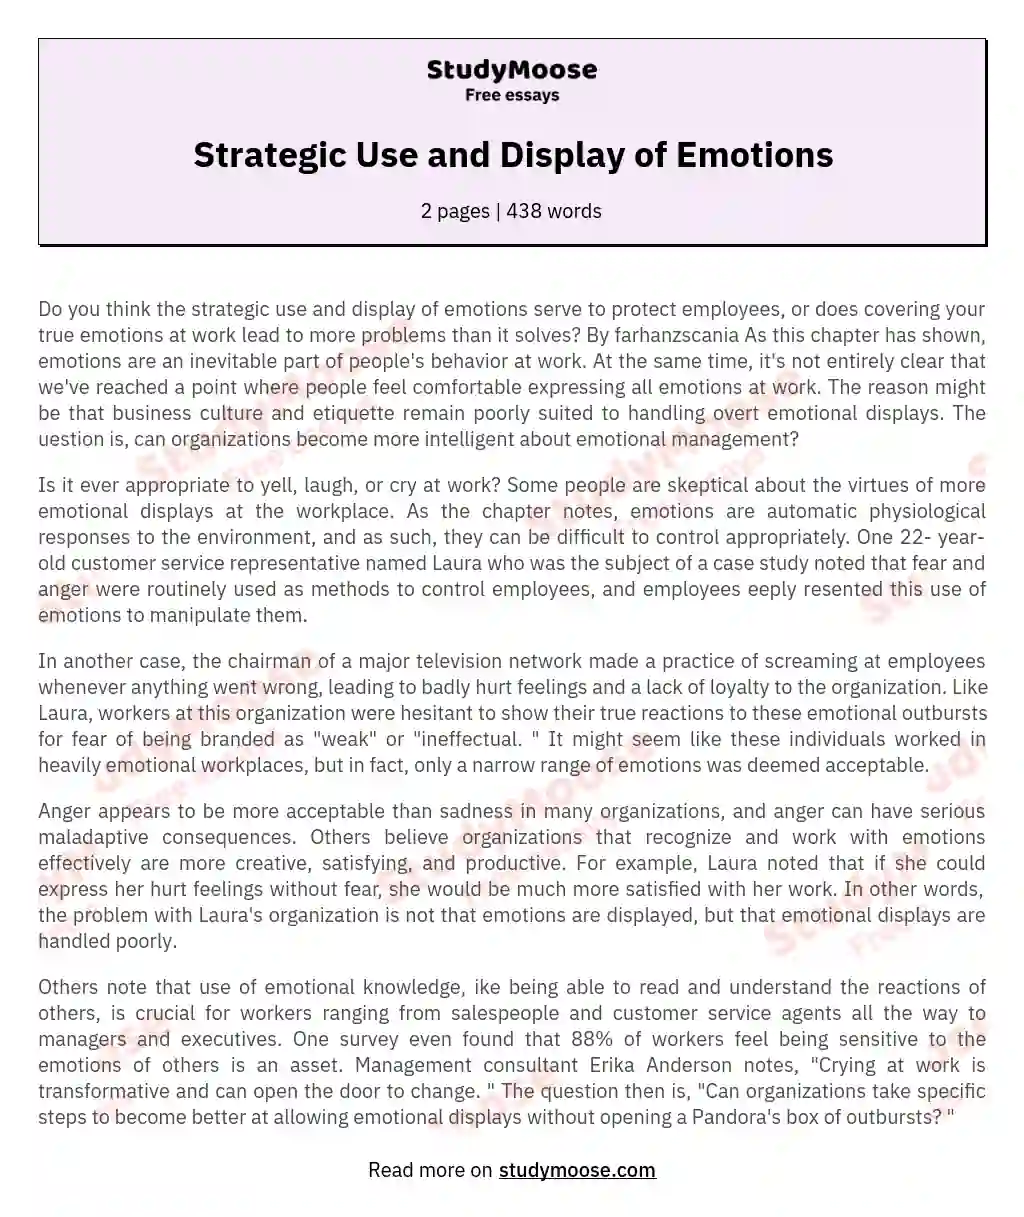 Strategic Use and Display of Emotions essay